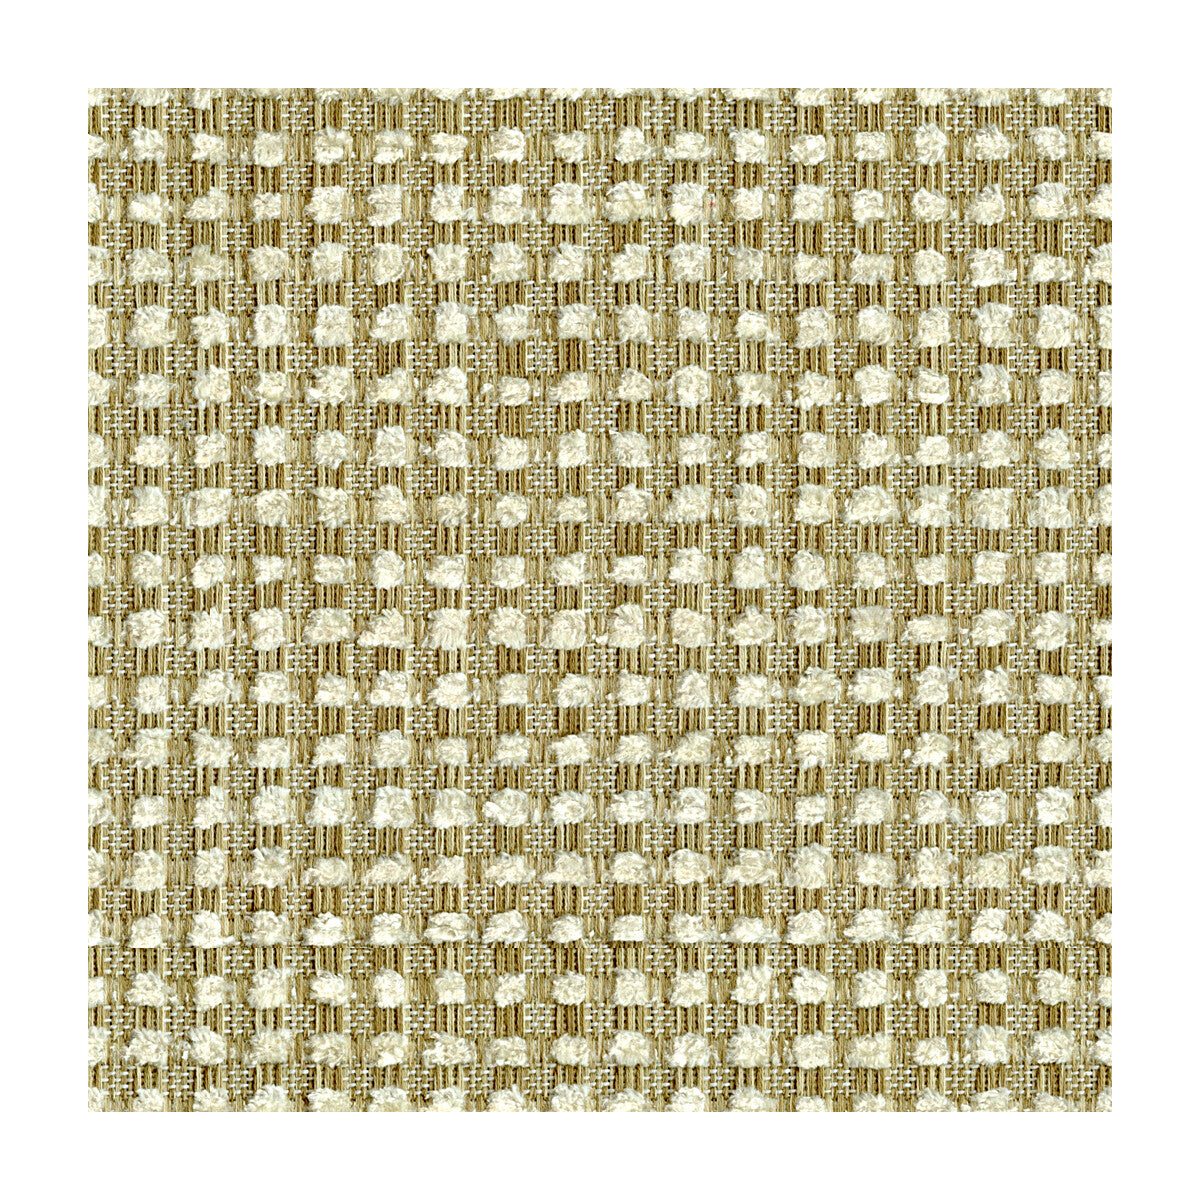 Bubble Tea fabric in champagne color - pattern 32012.416.0 - by Kravet Design in the Candice Olson collection